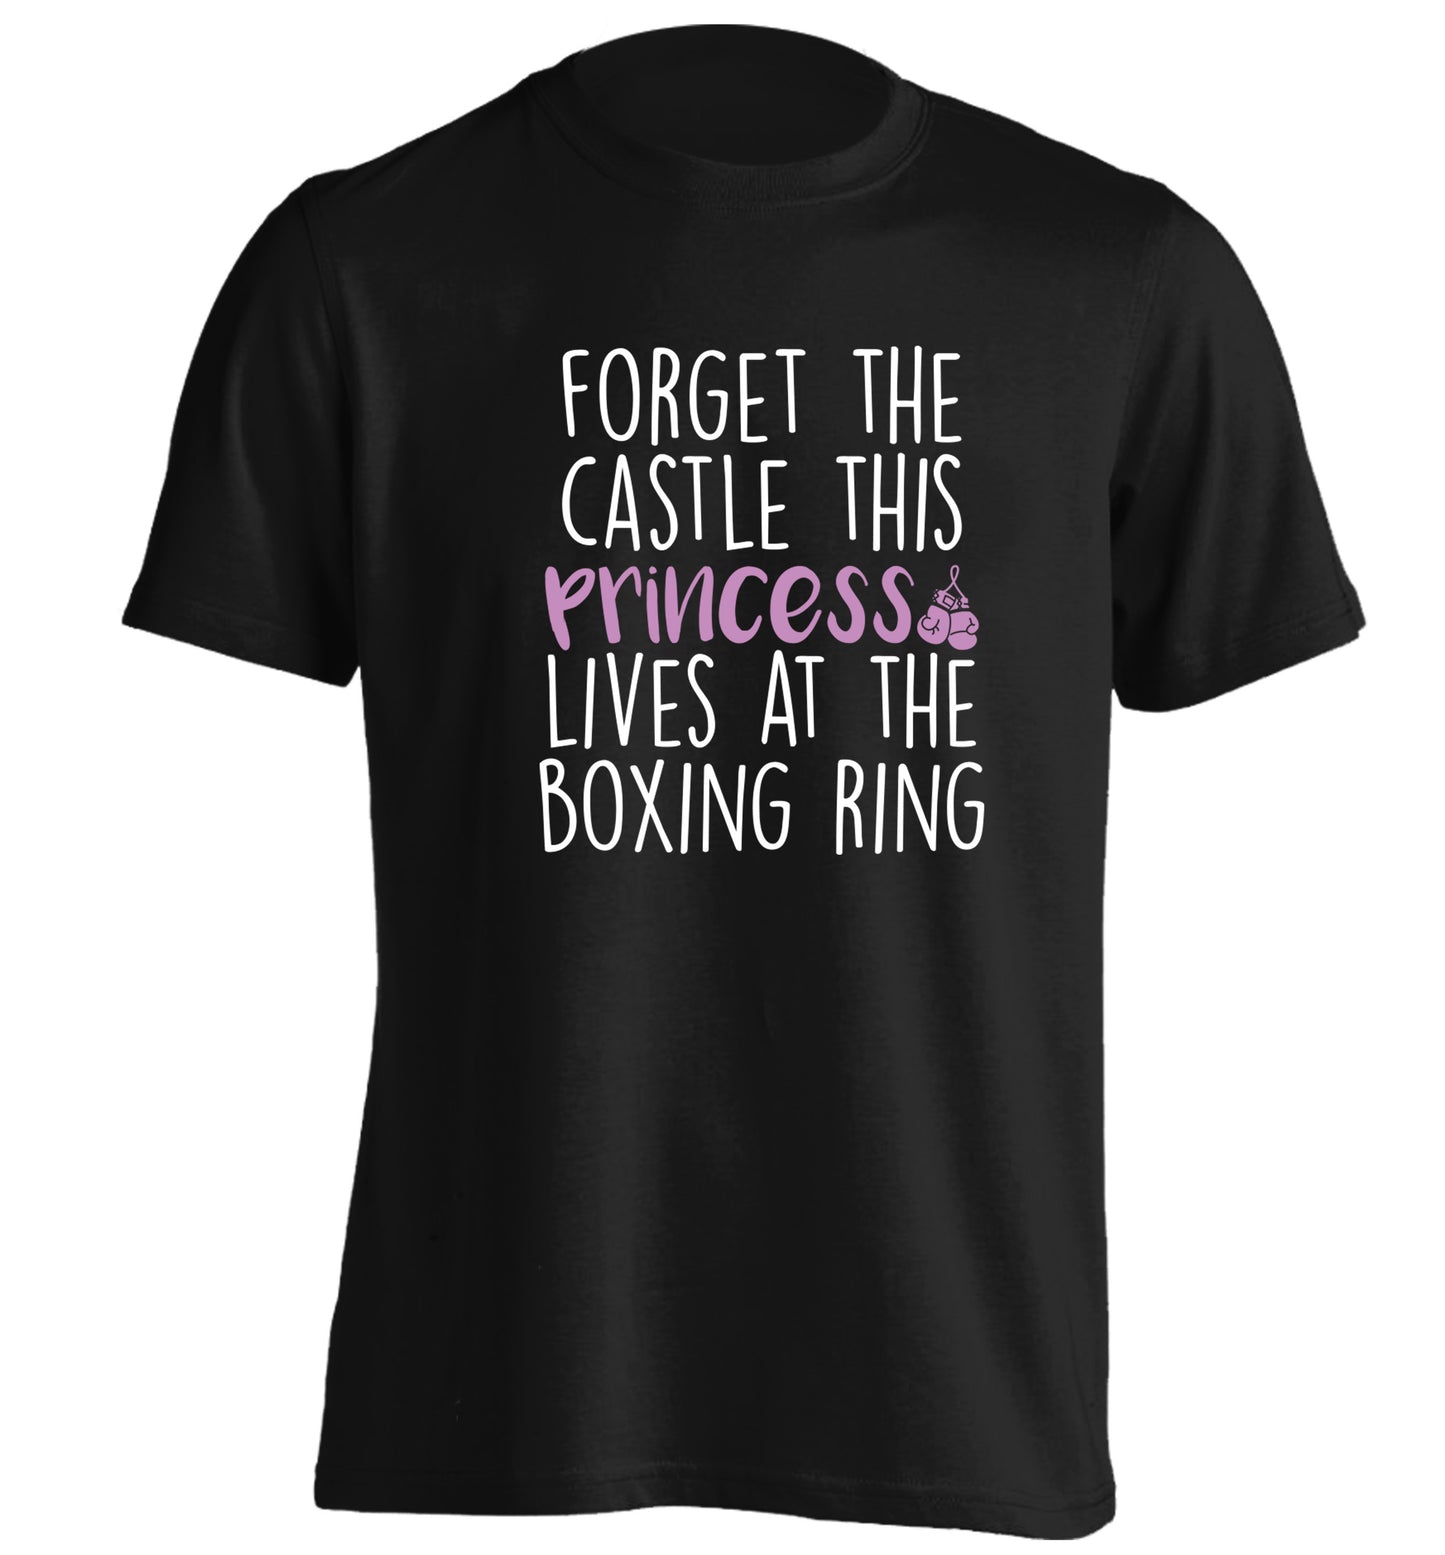 Forget the castle this princess lives at the boxing ring adults unisex black Tshirt 2XL